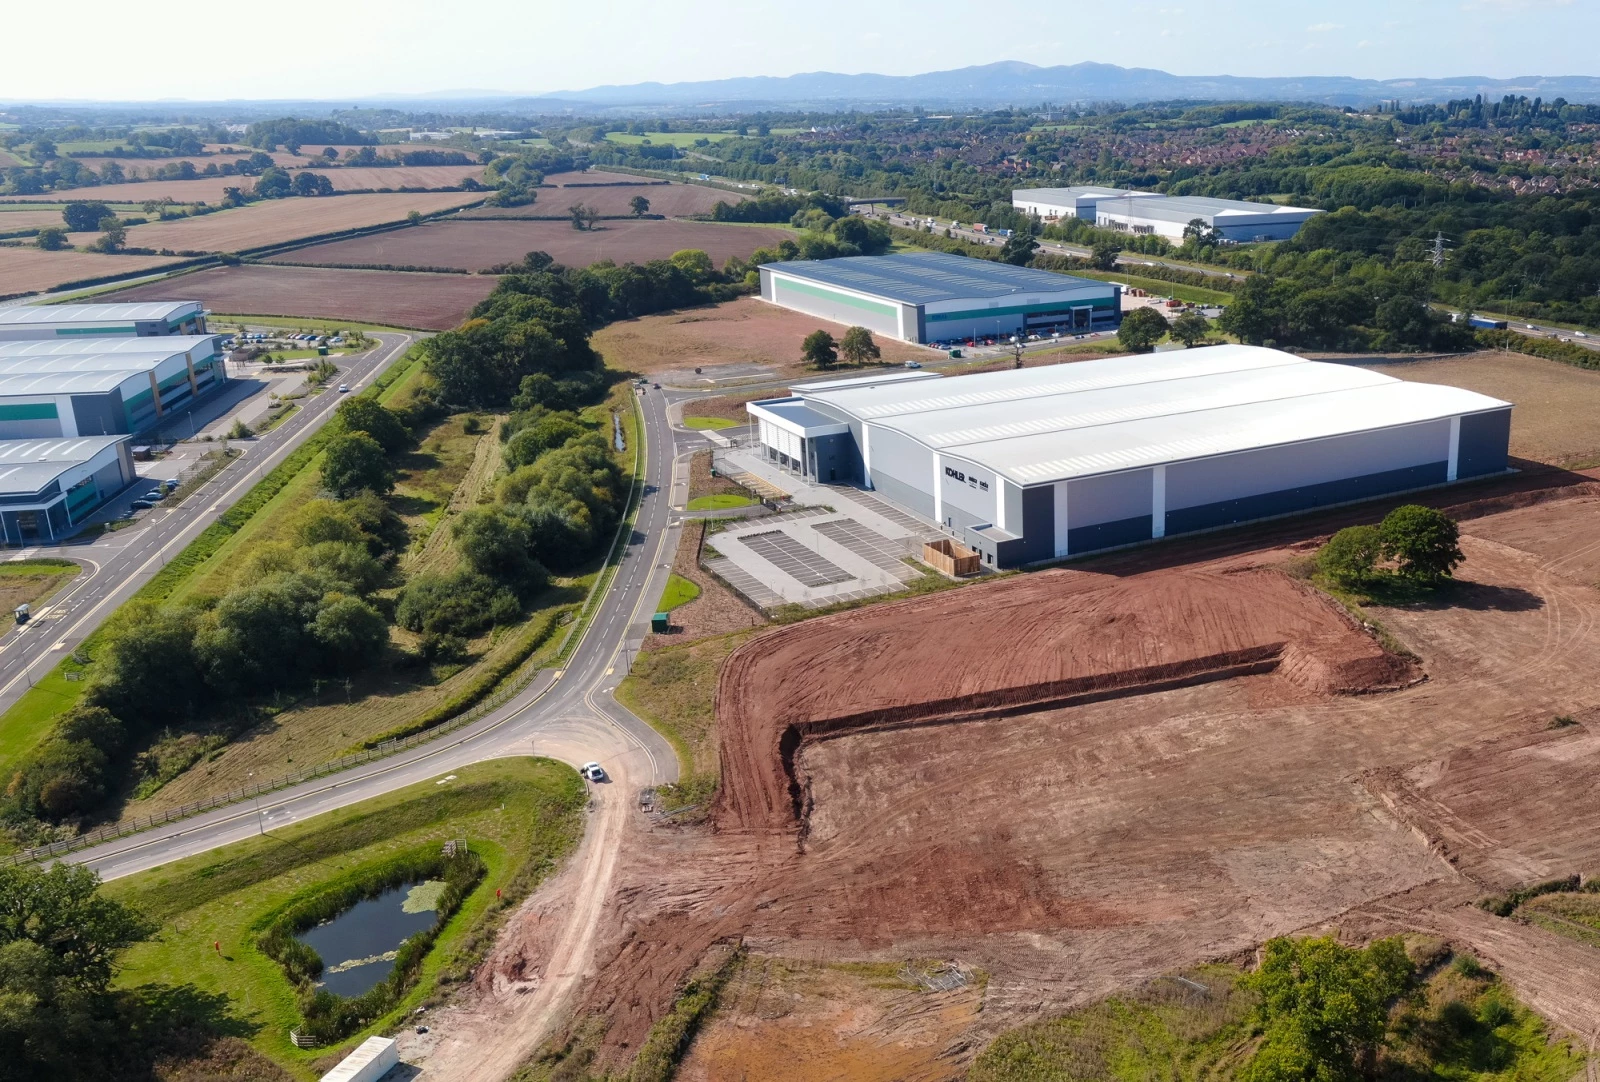 The "green spine" at Worcester Six - part of Stoford's ambitious plans to safeguard and improve the ecology at the business park